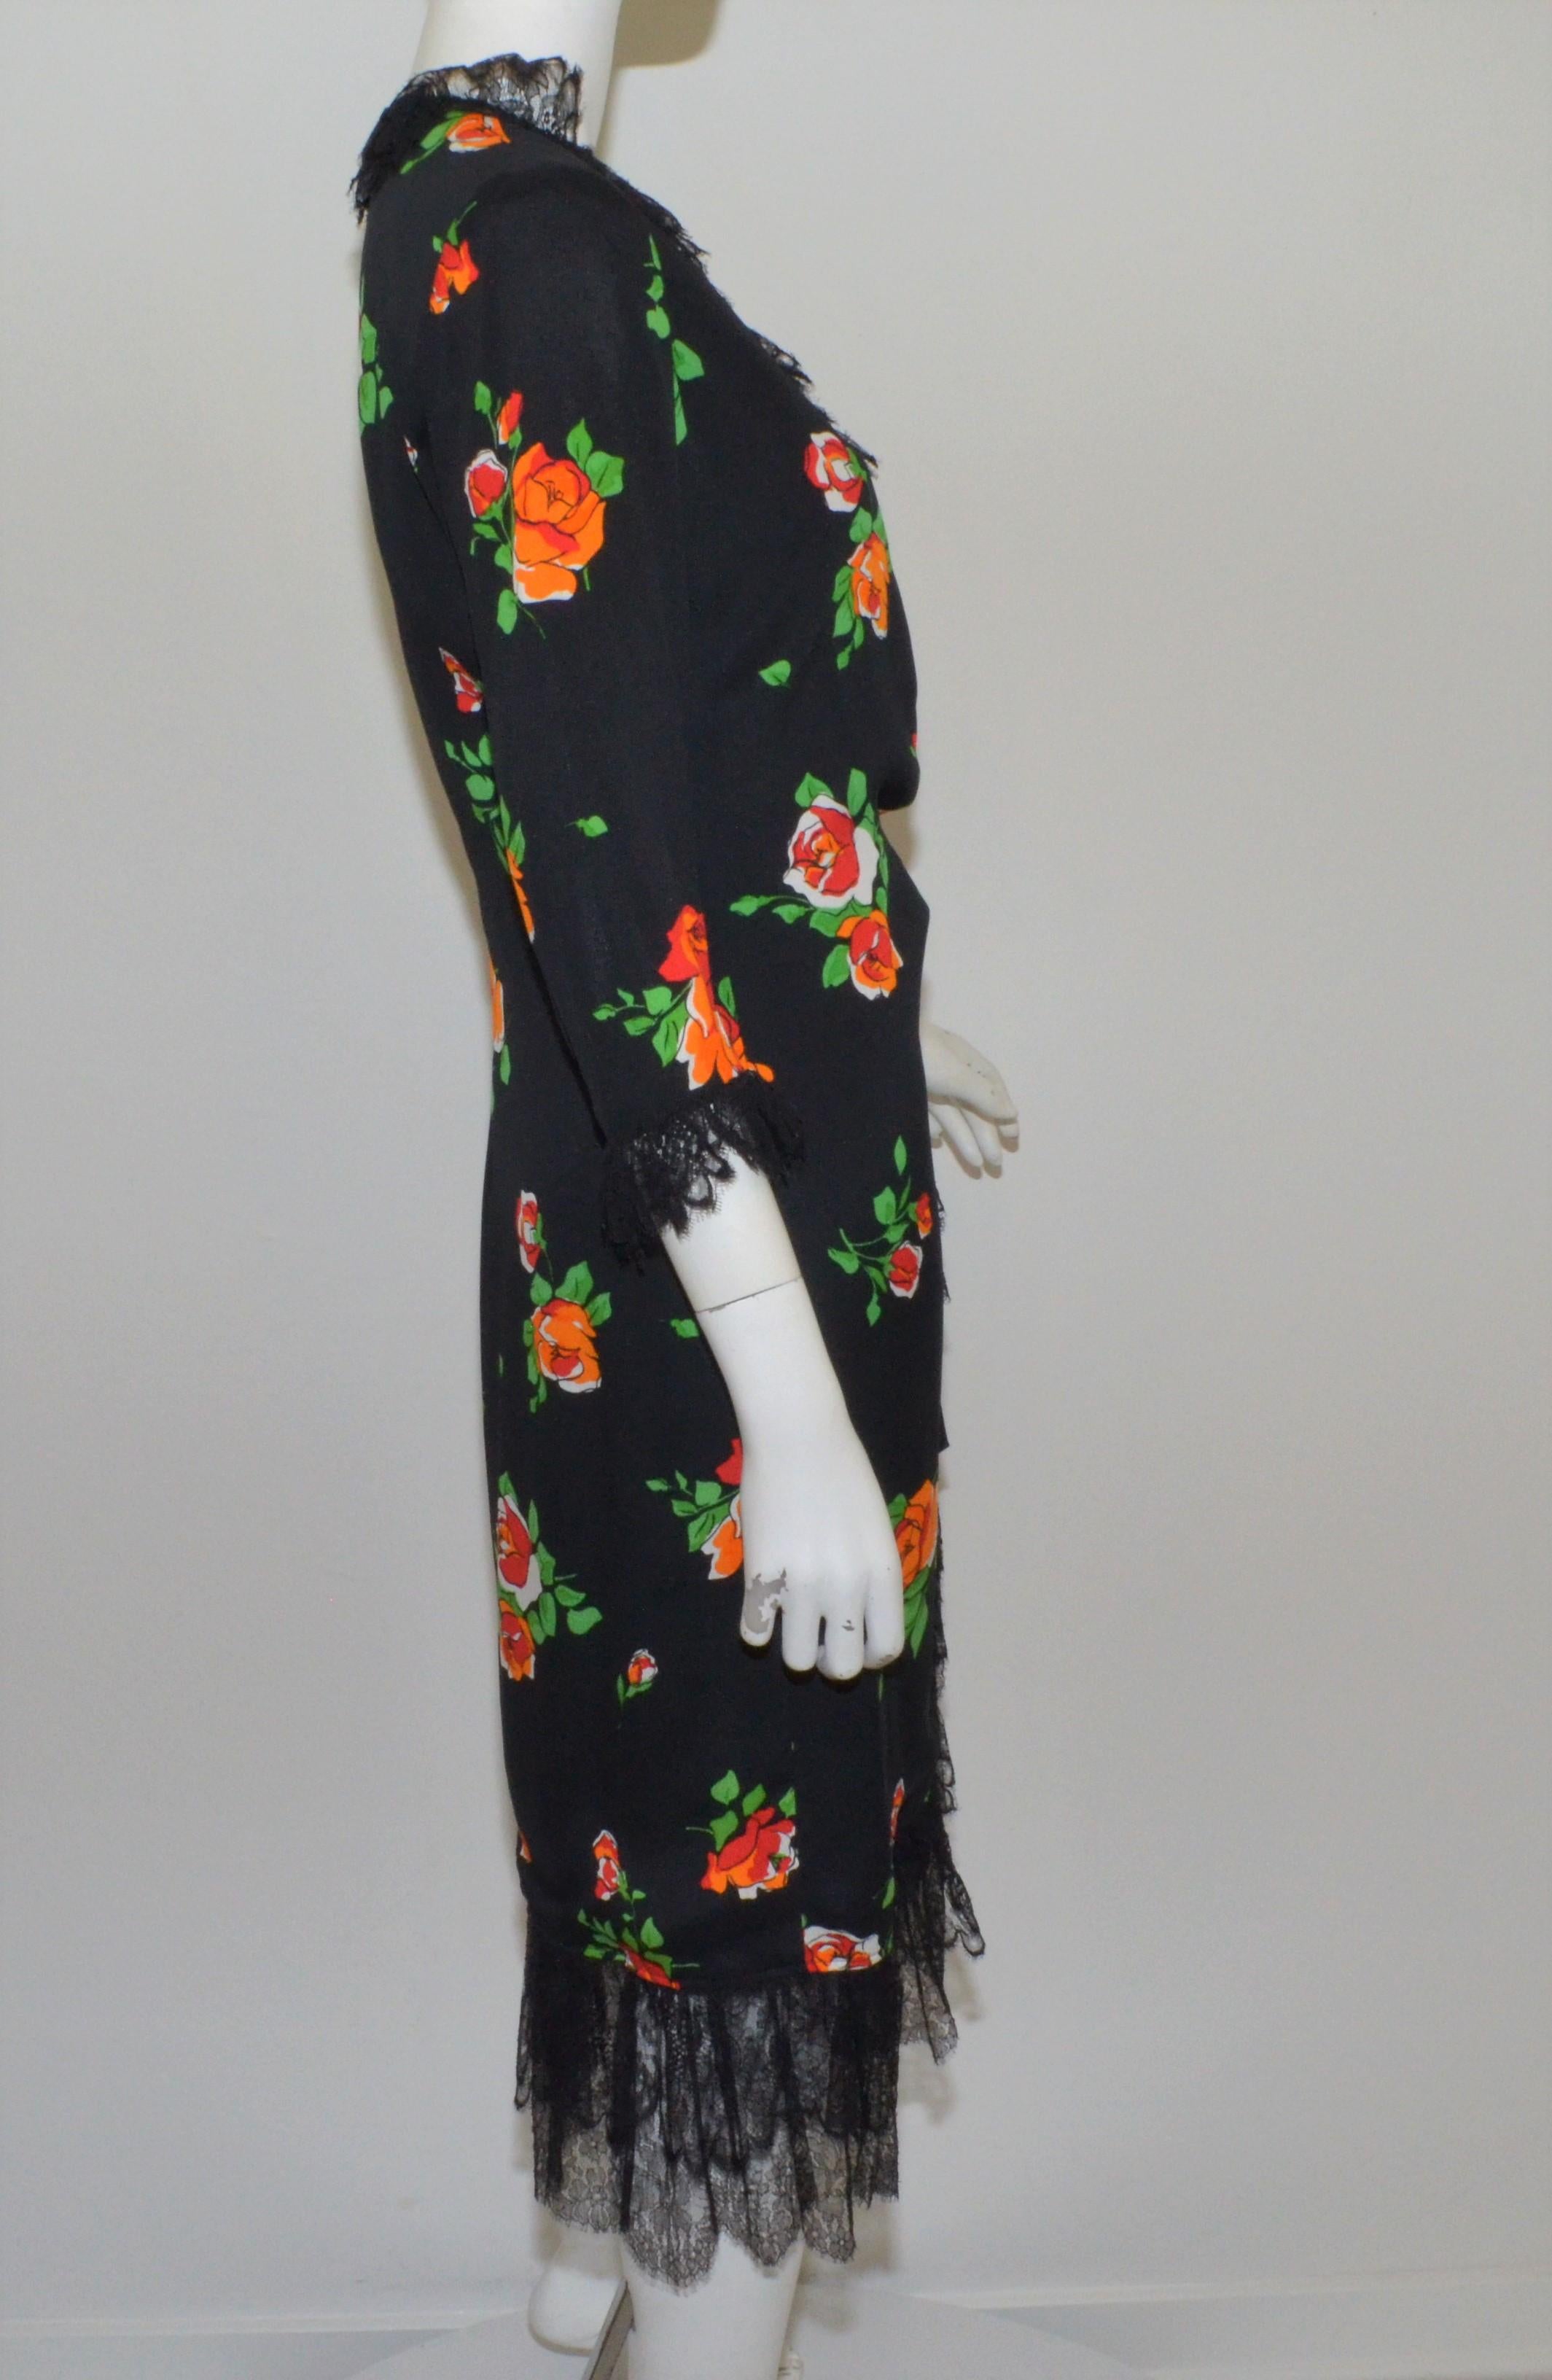 Yves Saint Laurent 1970's floral print dress features black French lace trimmings and a wrap style fastening. Dress is fully lined and is in great vintage condition. 

bust 37'',
sleeves 21''
waist 28''
hips 36''
length 46''